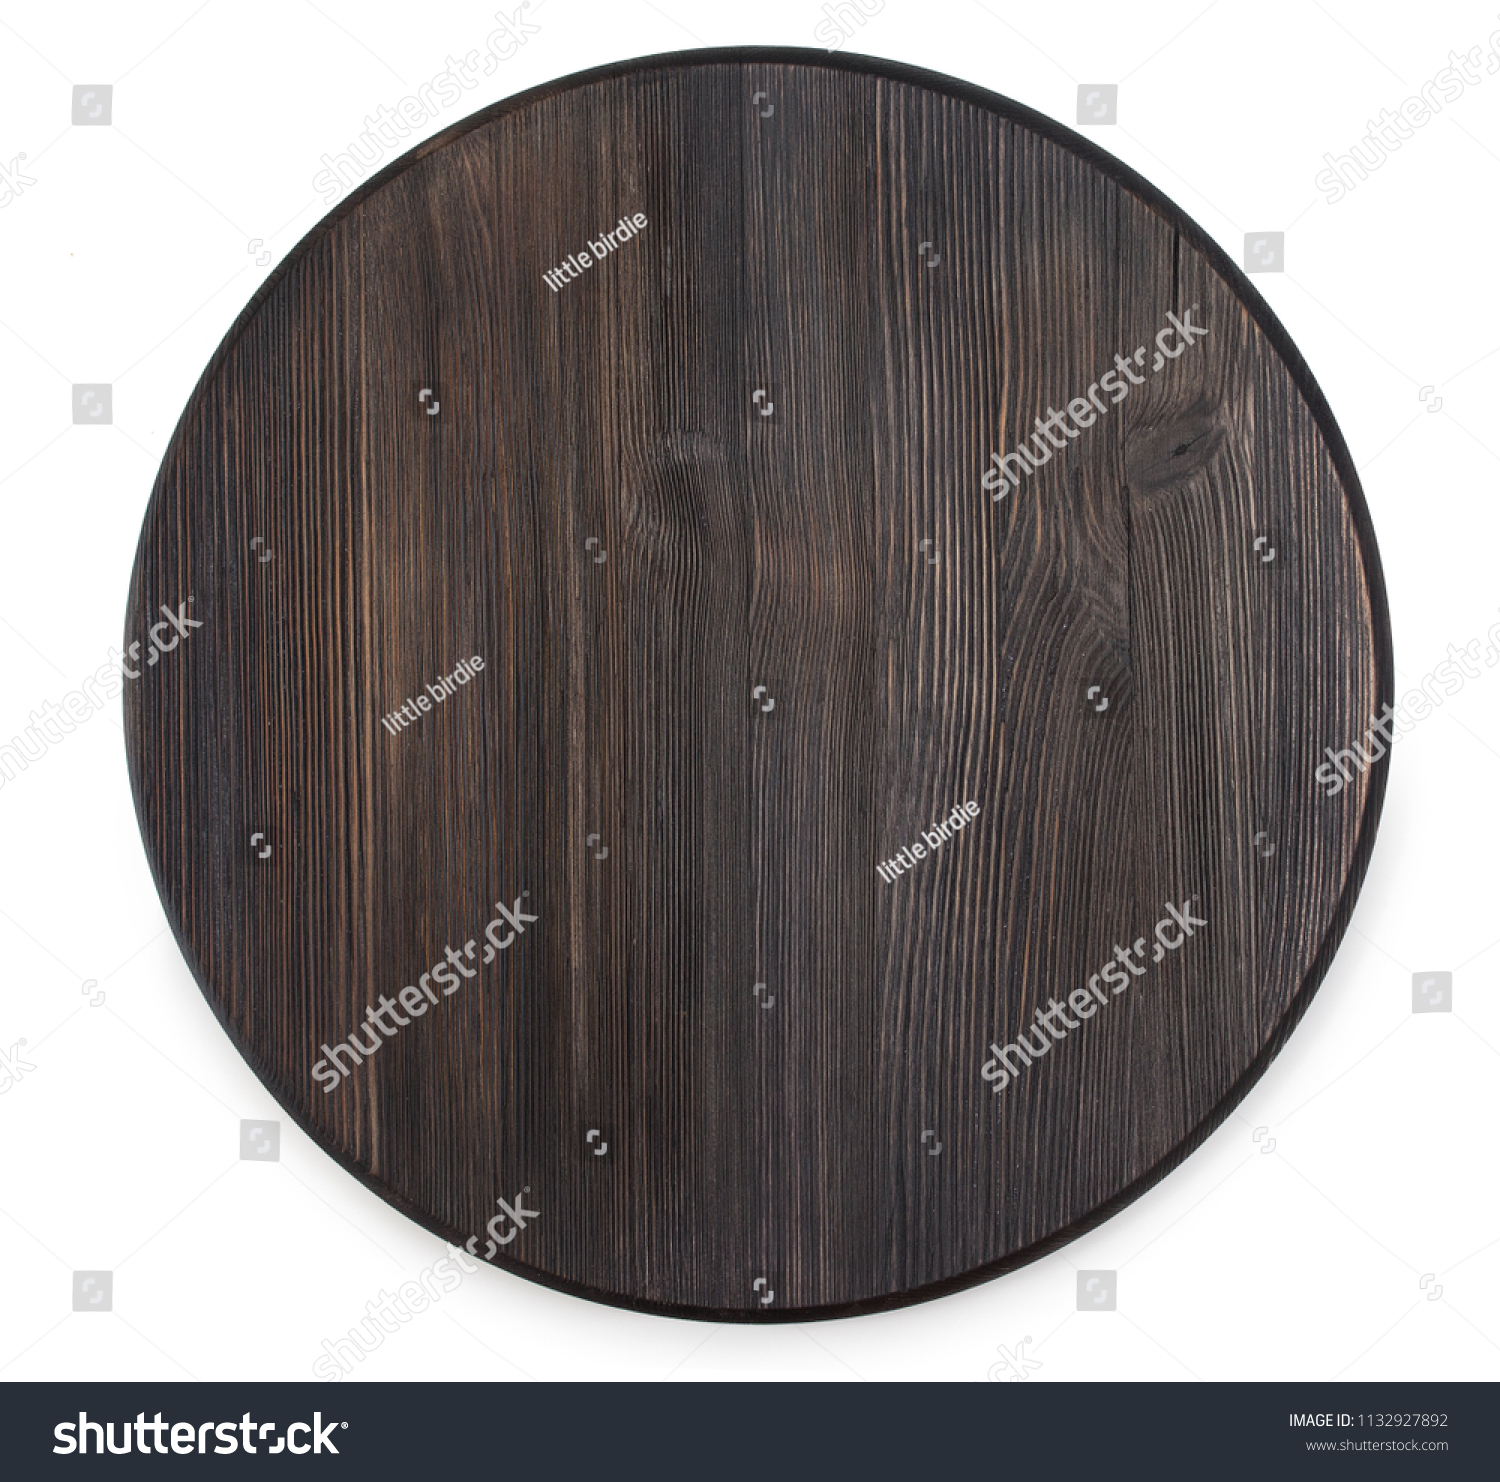 Vintage old textured wooden round cutting board isolated on a white background, top view. #1132927892